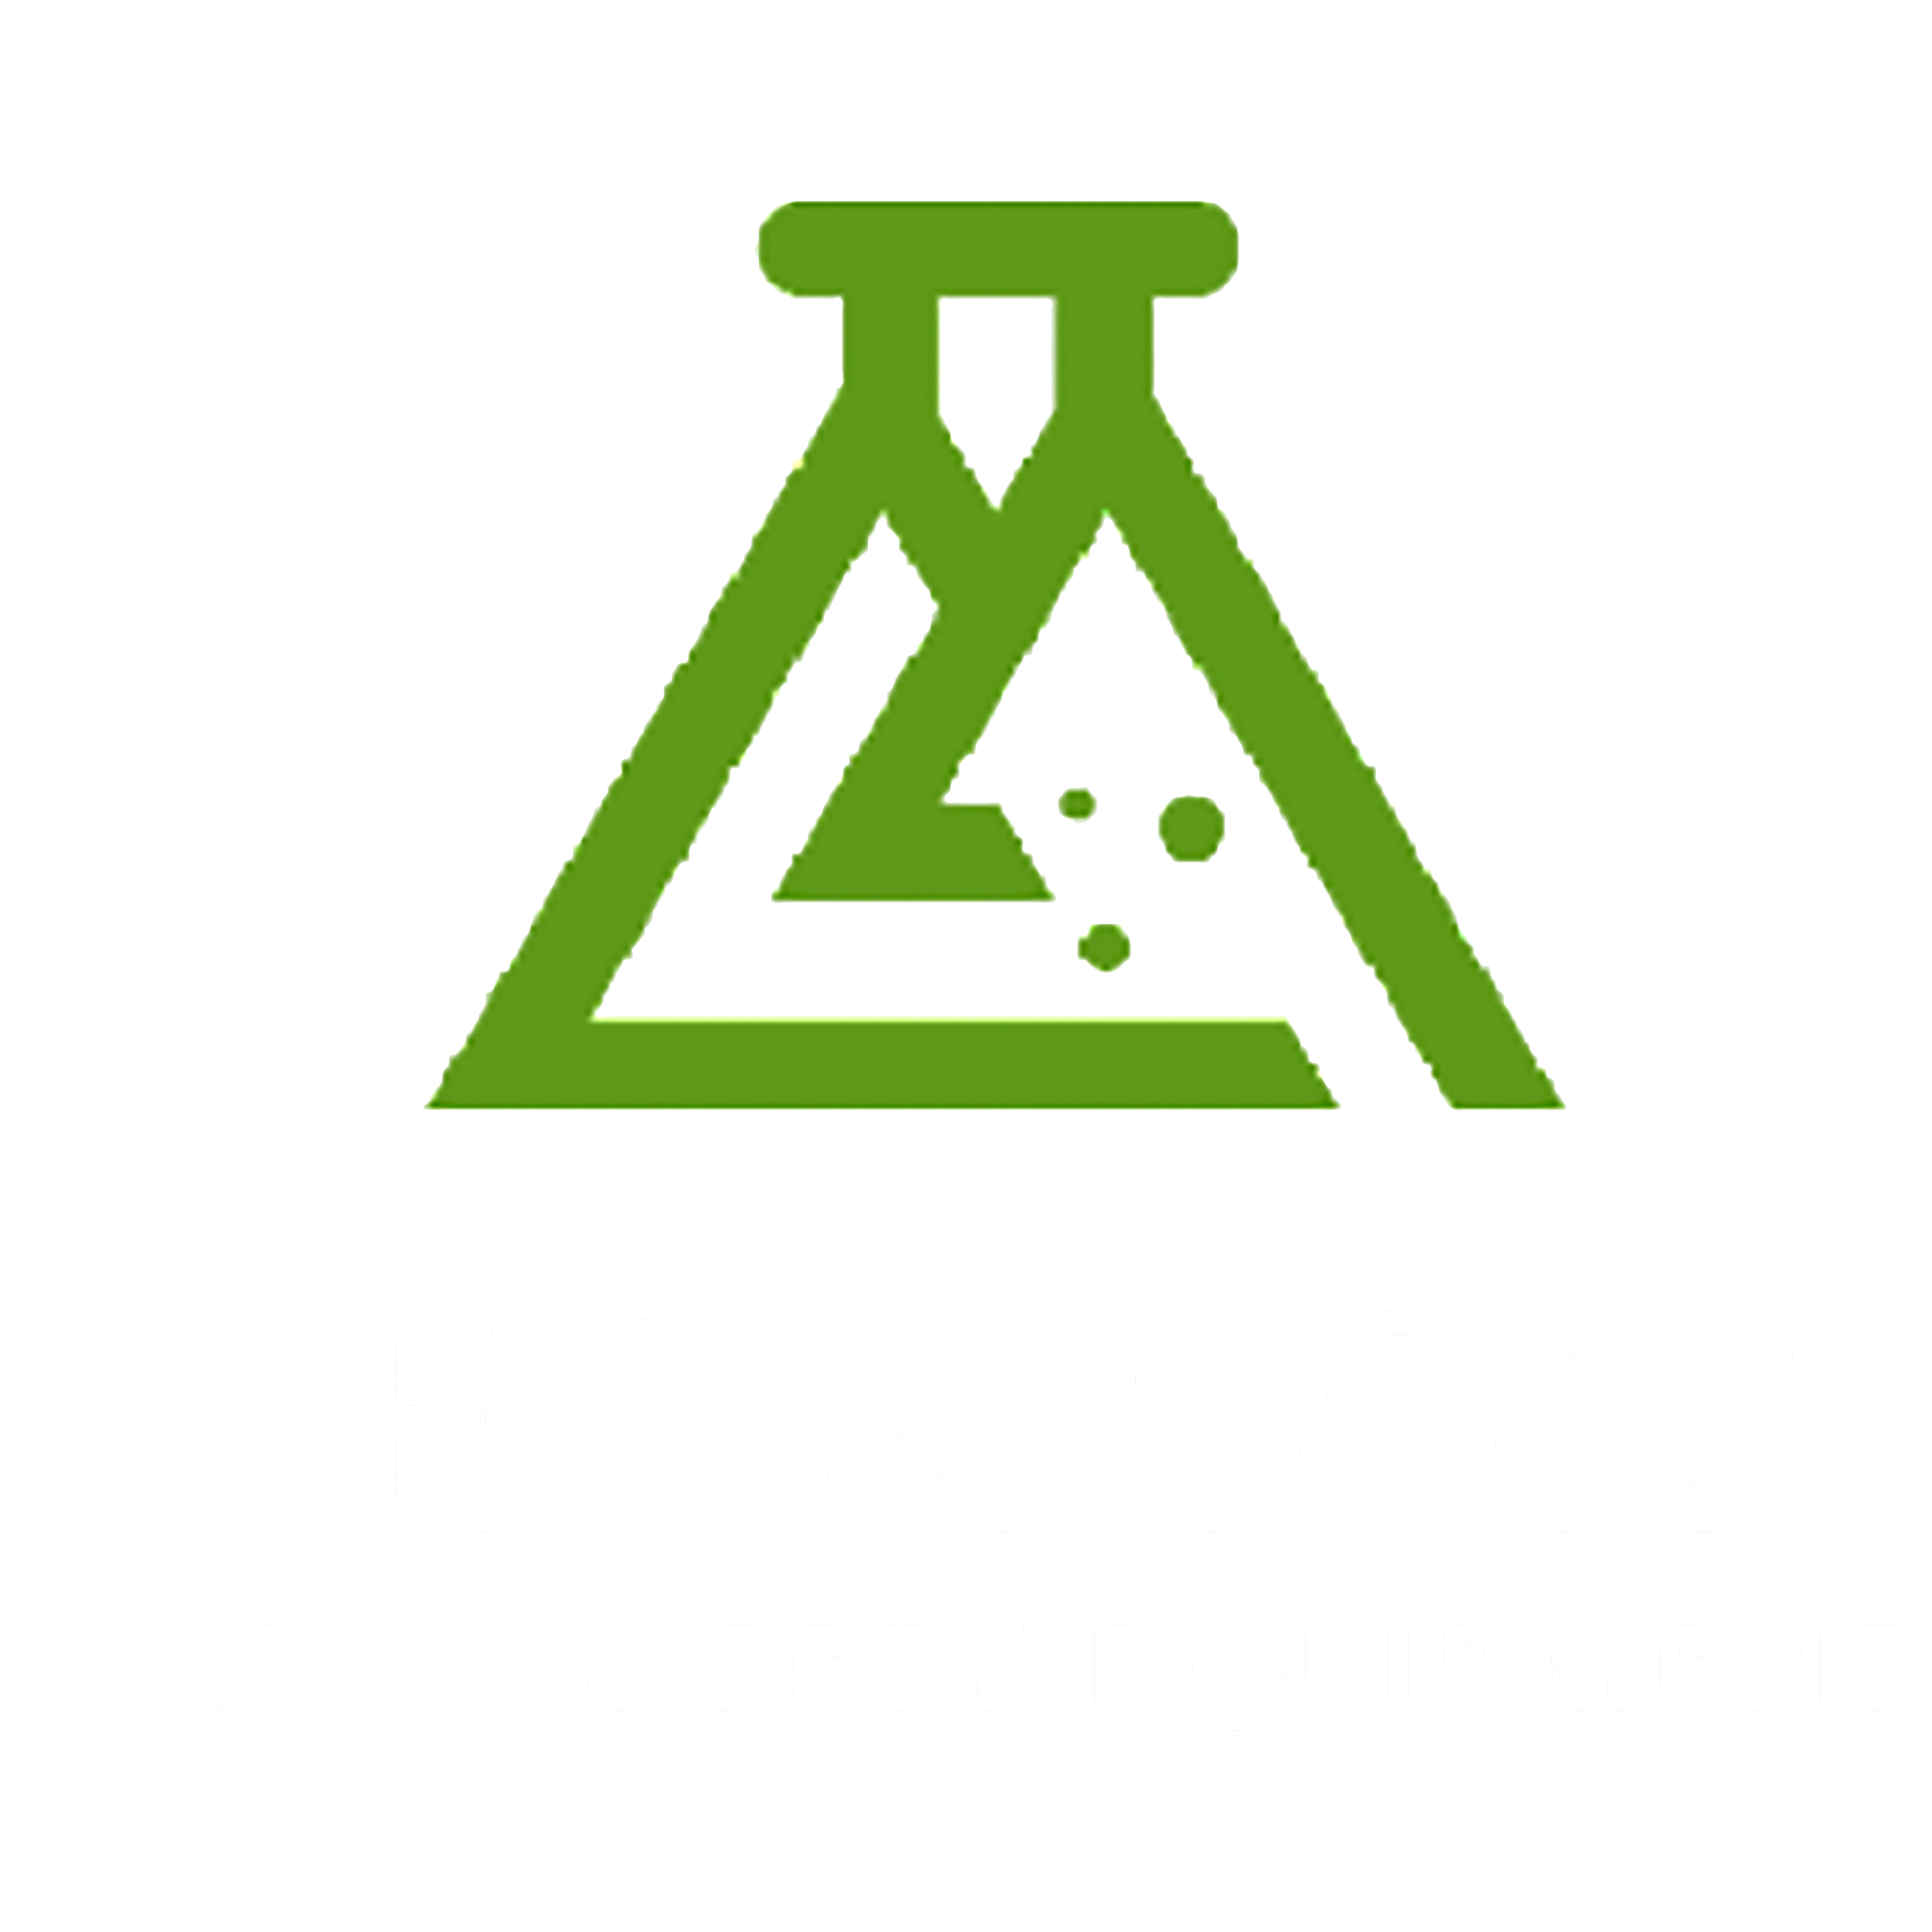 Syed & Sons. 